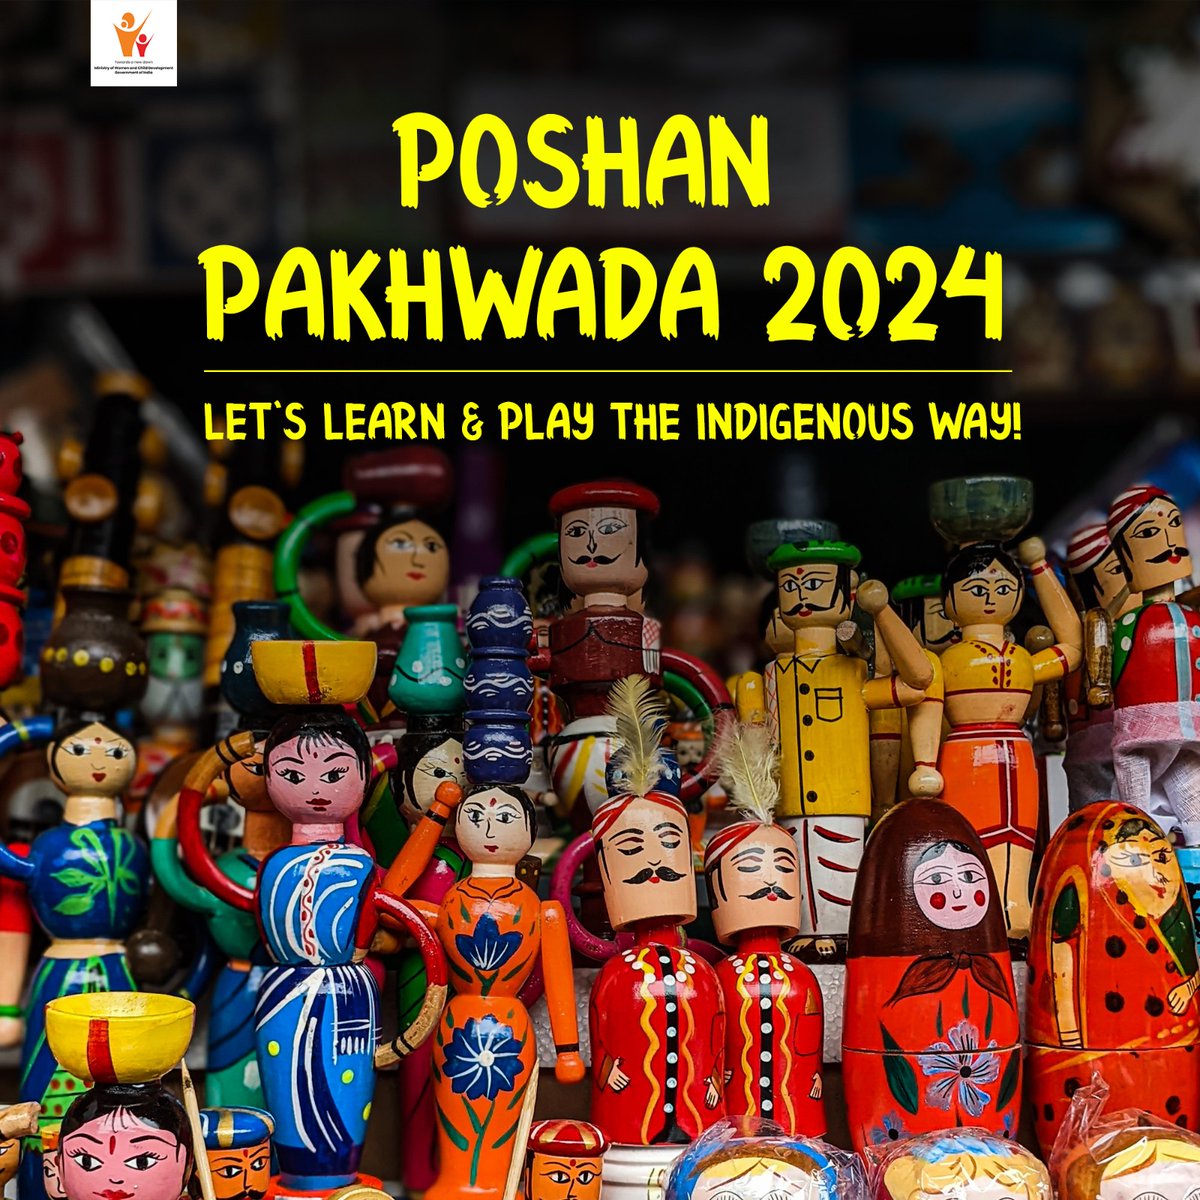 To facilitate Early Childhood Care and Education, the Ministry has emphasized the development and use of indigenous toys for learning at Anganwadi Centres. #PoshanPakhwada2024 activities will focus on such DIY toys within the community. . . #पोषणकामहत्व #पोषणपखवाड़ा @PIBWCD